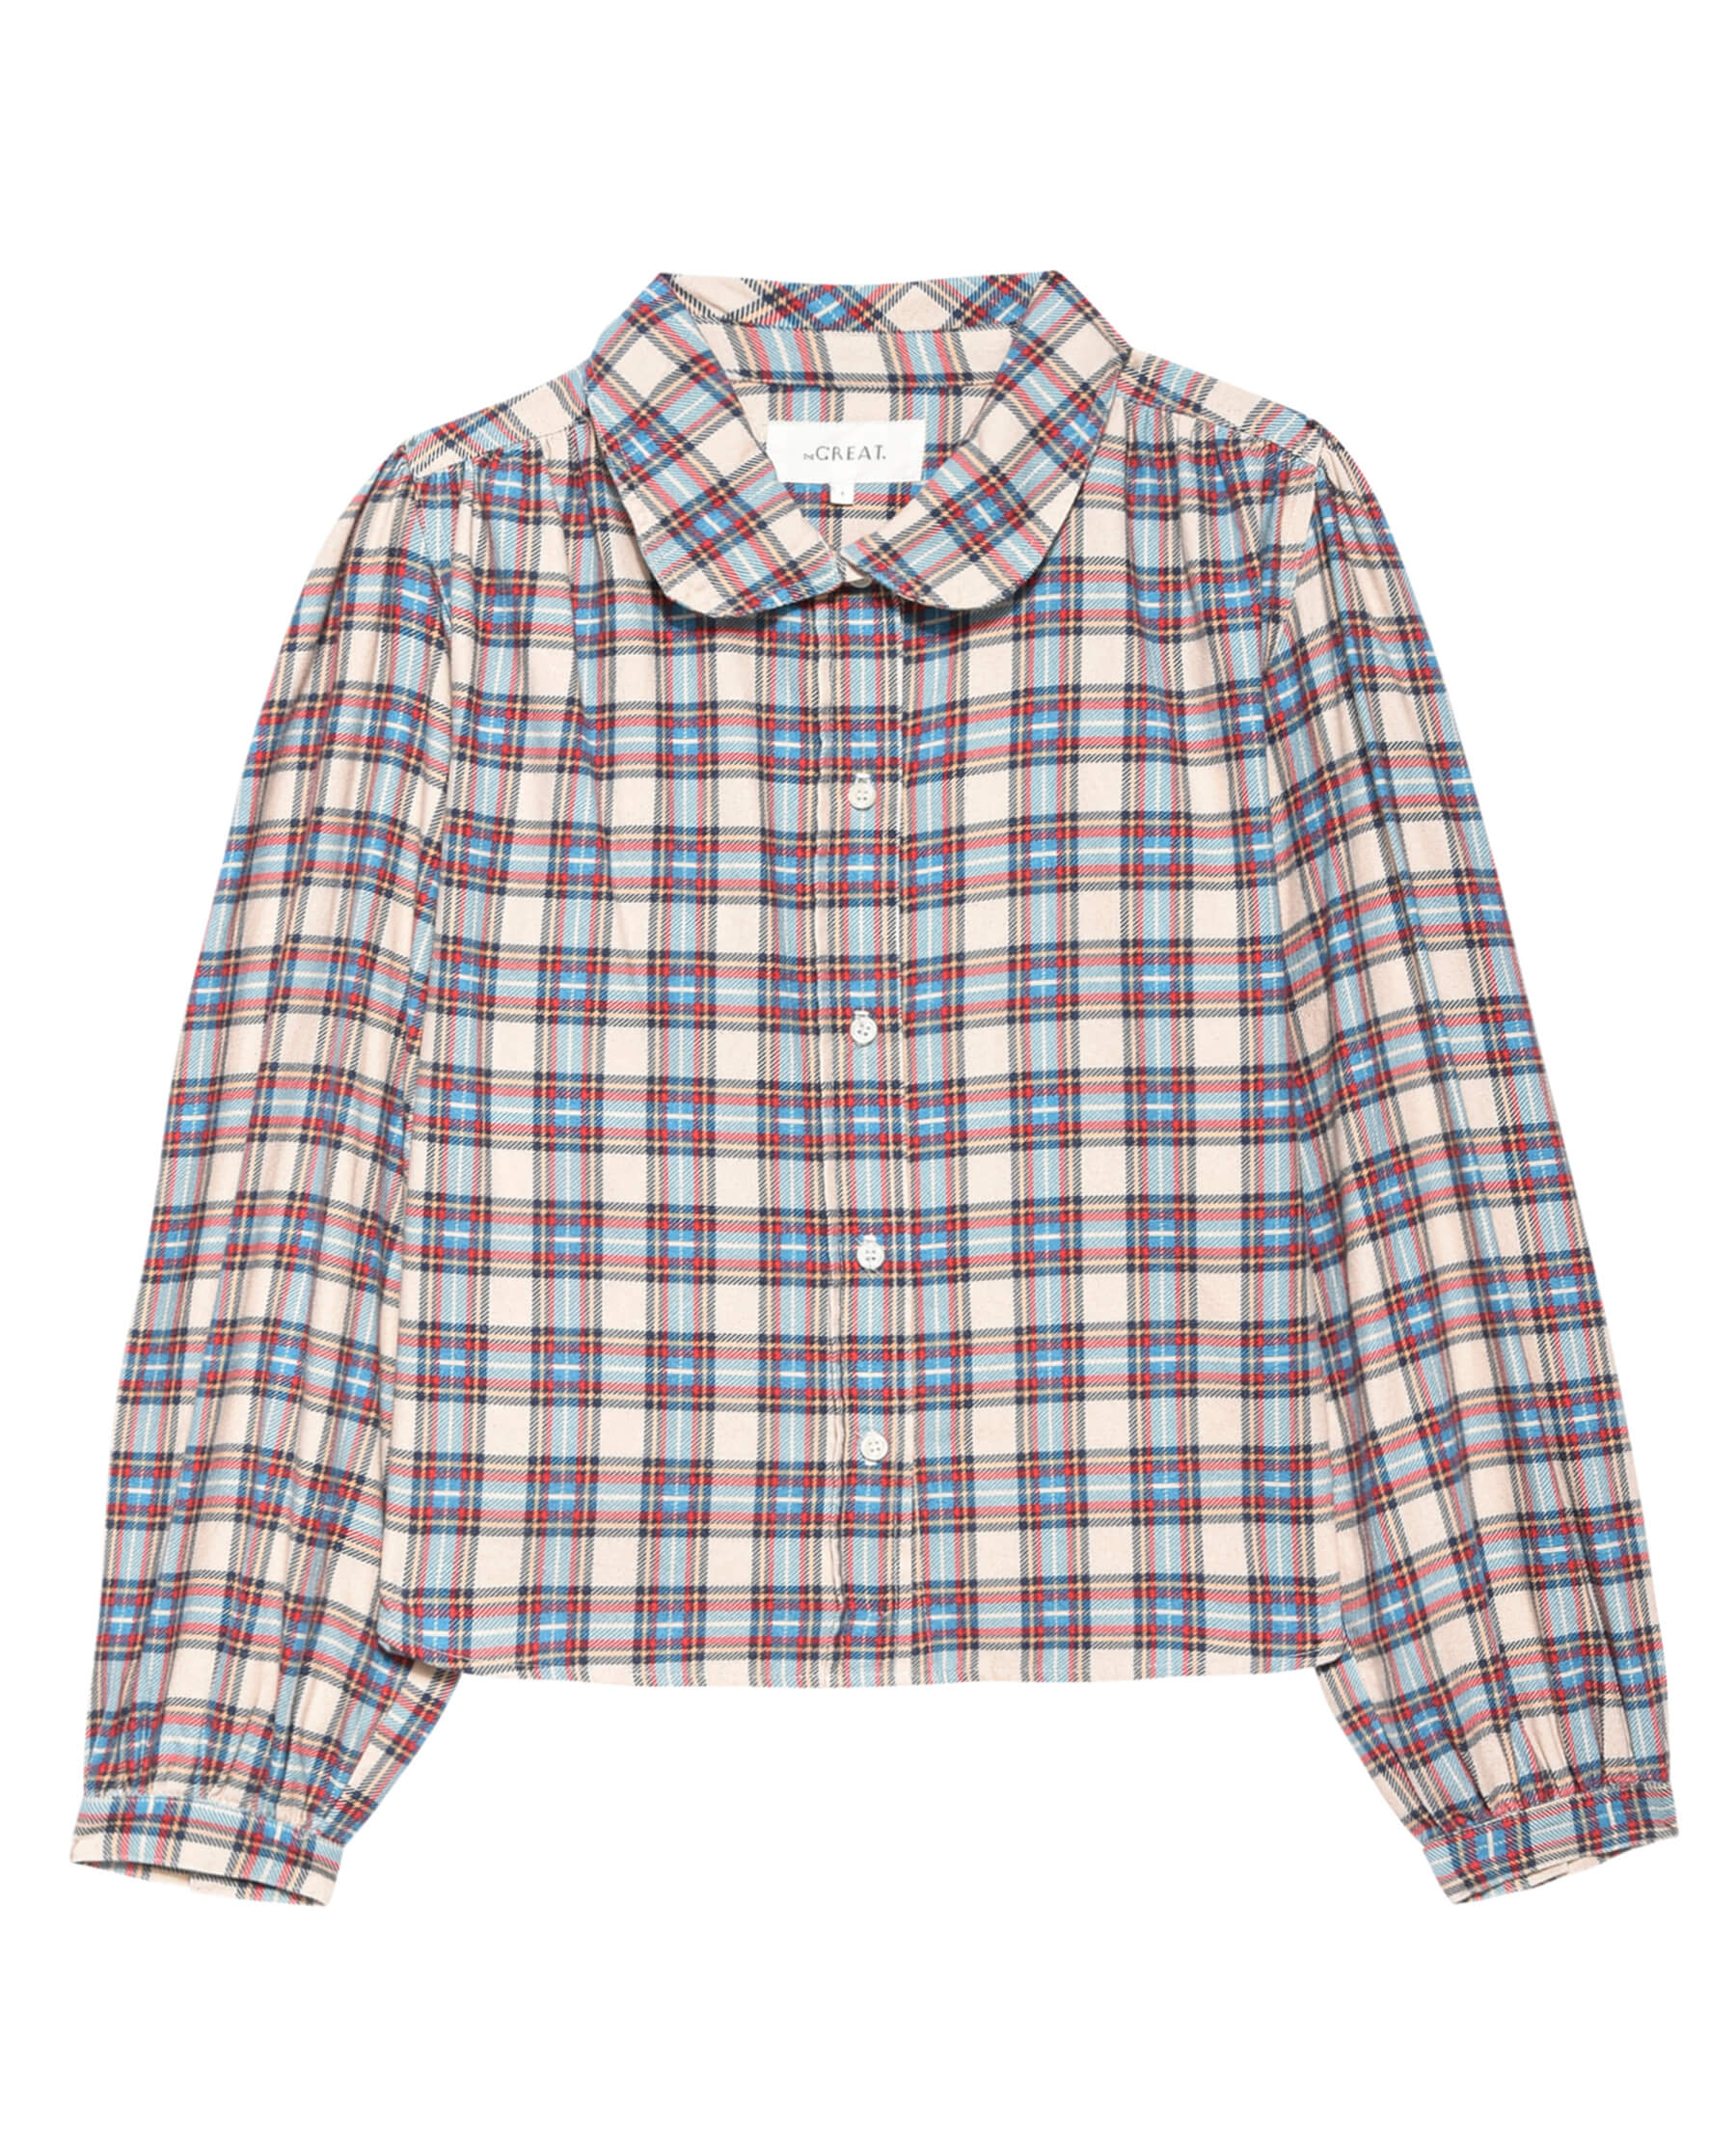 The Tableau Top. -- Market Plaid SHIRTS THE GREAT. PS24 SALE